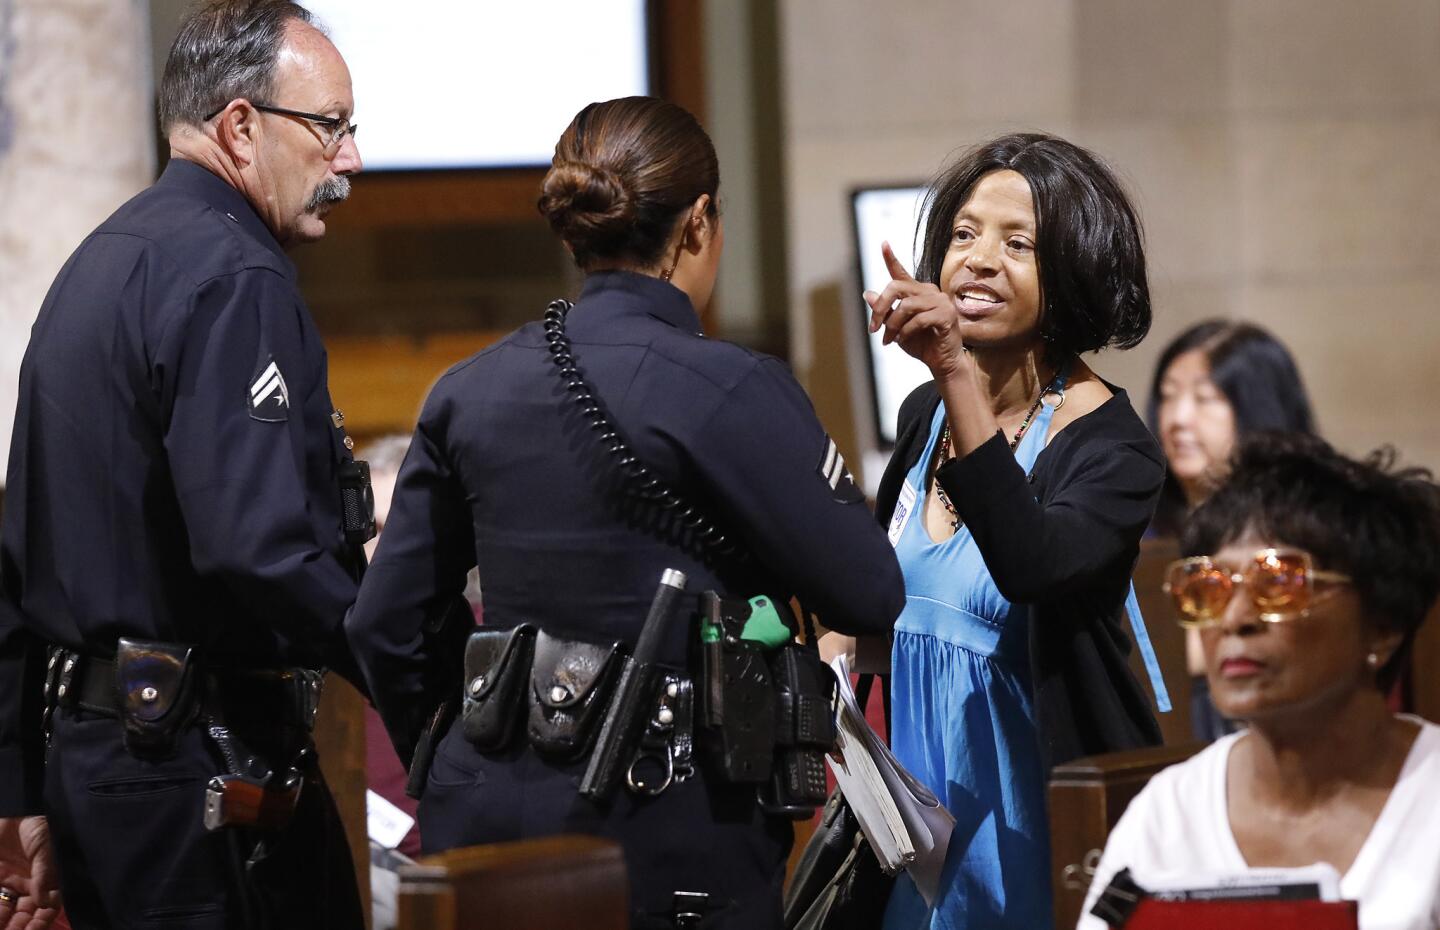 Yvonne Michelle Autry, right, is ejected during a City Council meeting.